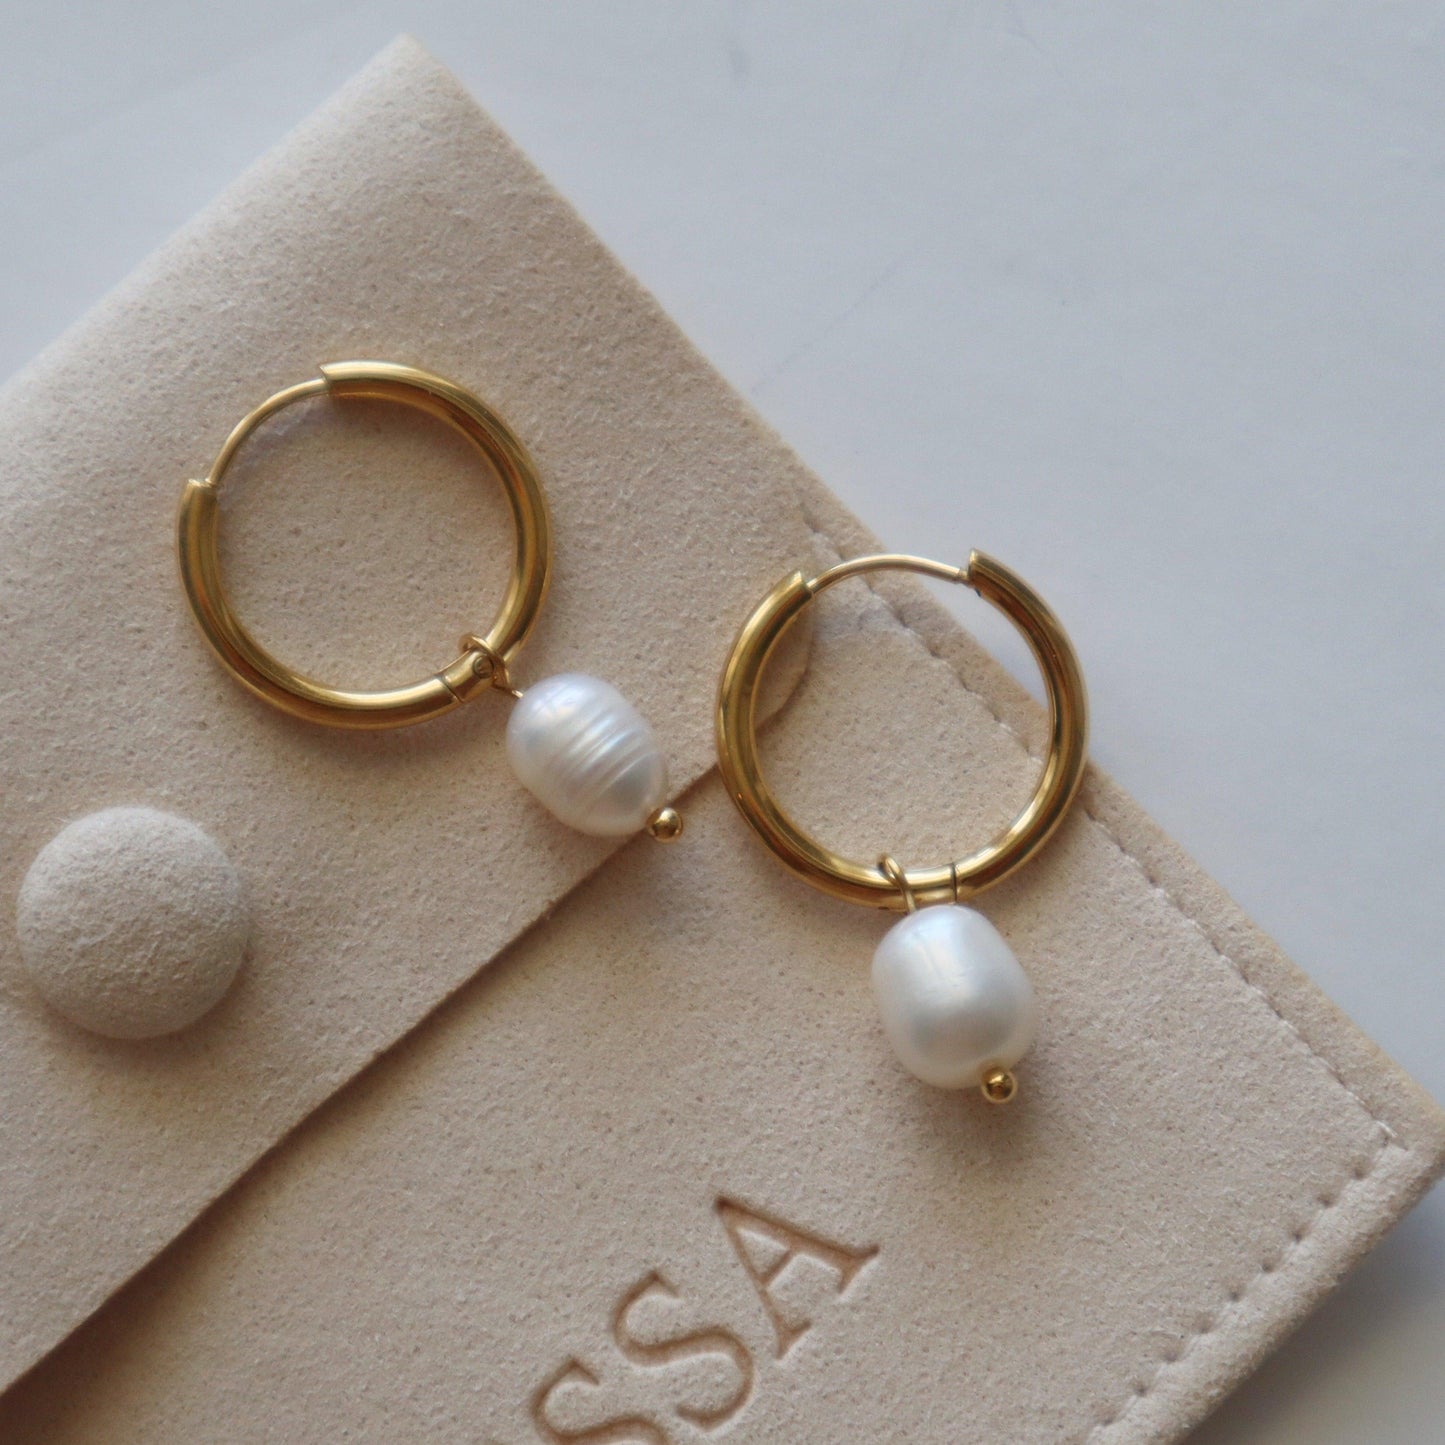 Pearl Hoops - JESSA JEWELRY | GOLD JEWELRY; dainty, affordable gold everyday jewelry. Tarnish free, water-resistant, hypoallergenic. Jewelry for everyday wear